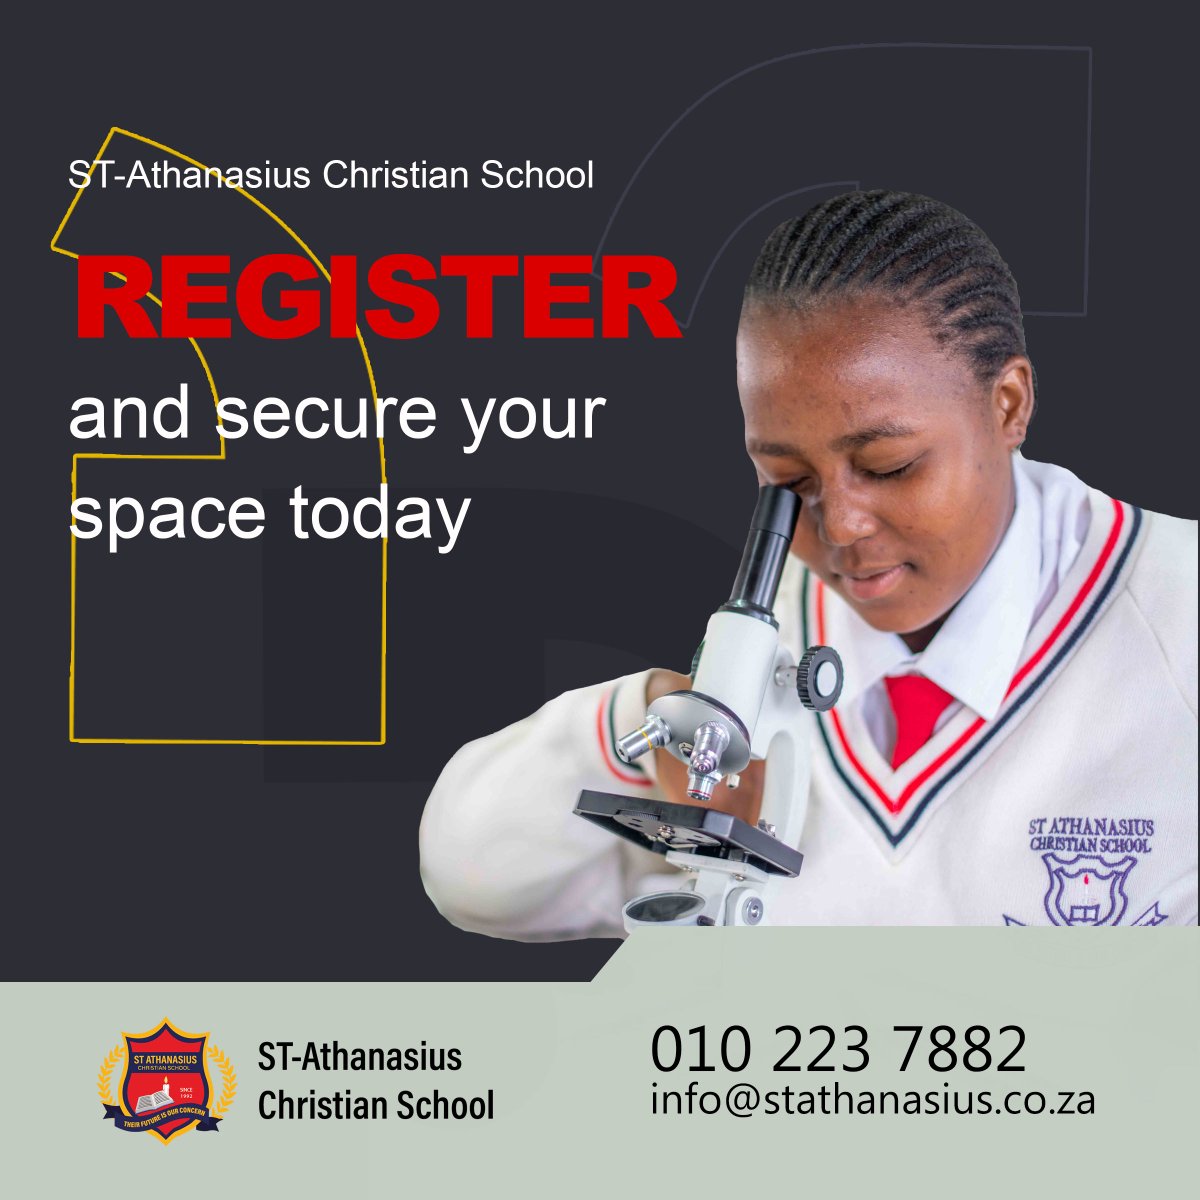 LEARNING STARTS HERE. We are open. Register and secure your space today. The earlier you register the better, our waiting lists work by registration date order #secondaryschool #HighSchool #education #SchoolEnrollment #primaryschool